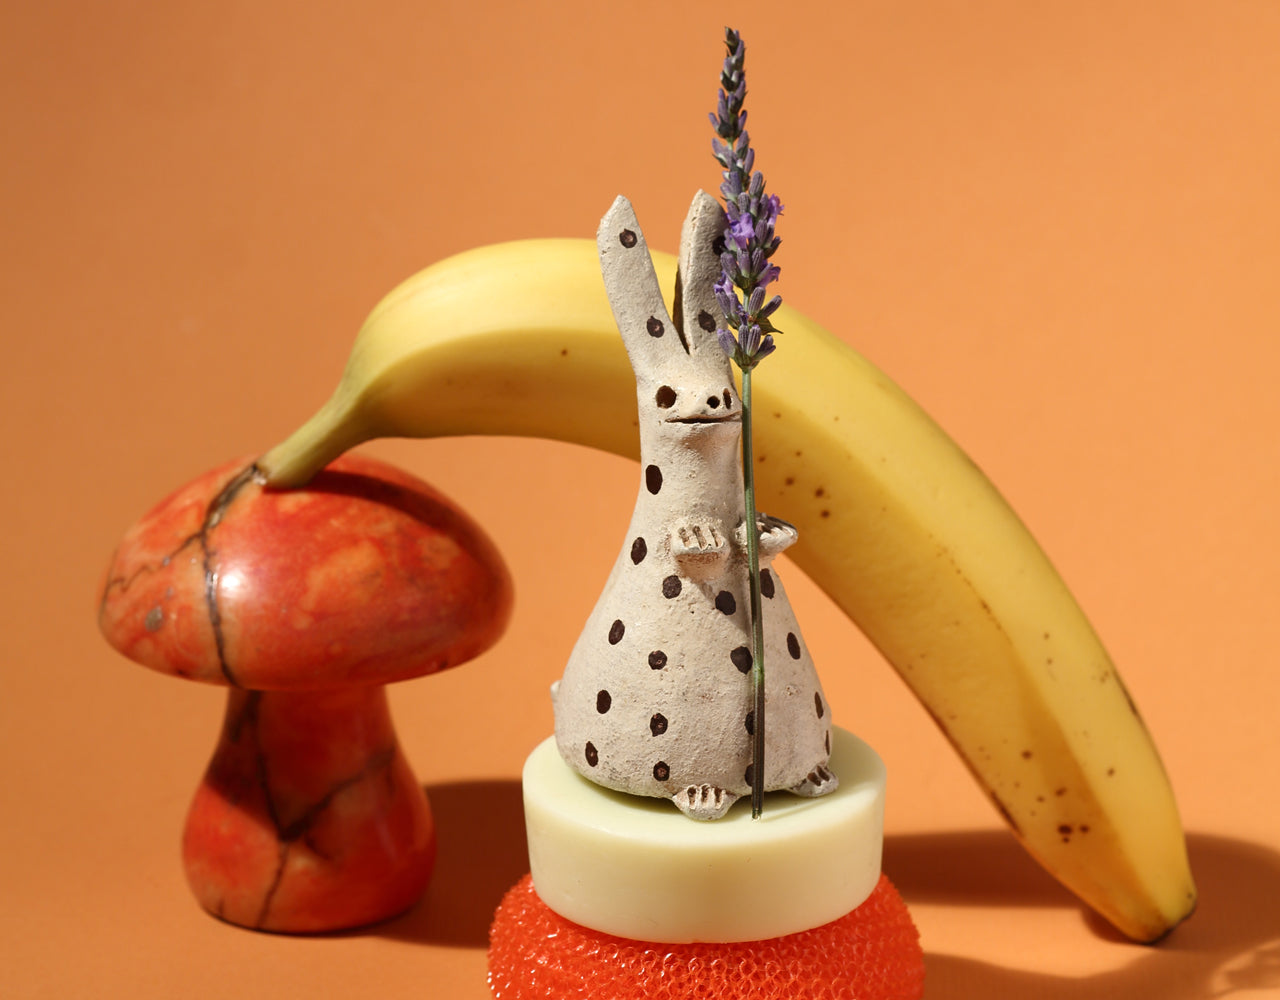 Unwrapped conditioner bar in a stack of a round red scrub sponge and a rabbit sculpture with brown polka-dots holding a stalk of lavender. There's a red mushroom sculpture and banana behind the rabbit, and a peach background.